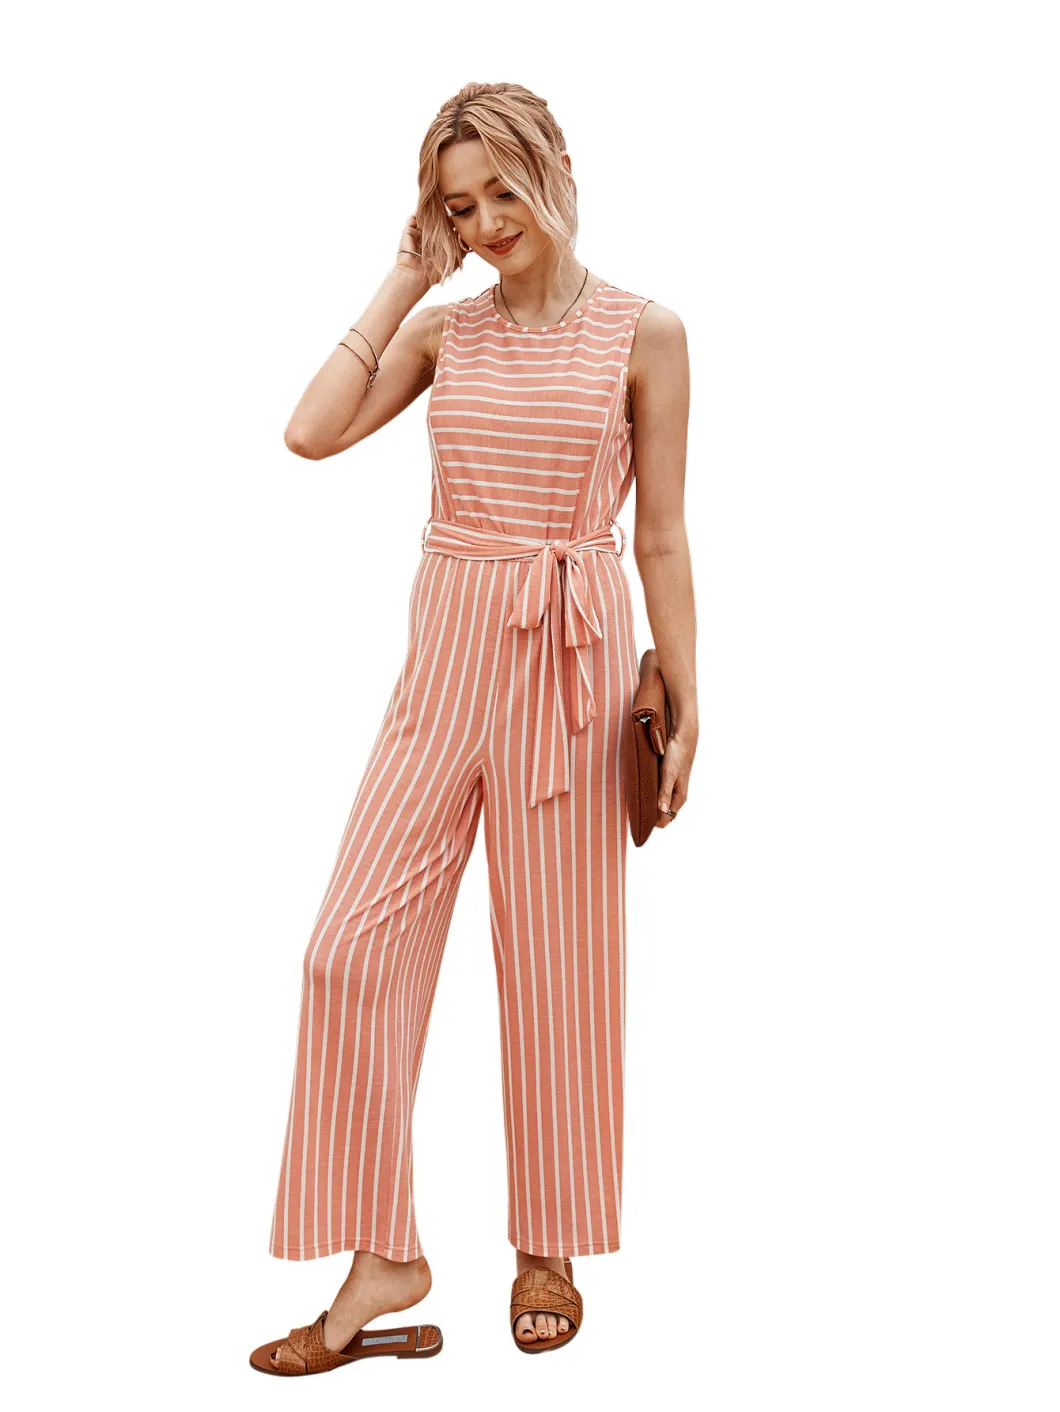 Hot Style New Summer Striped Jumpsuit Fashion Life Vest Casual Women's Pants